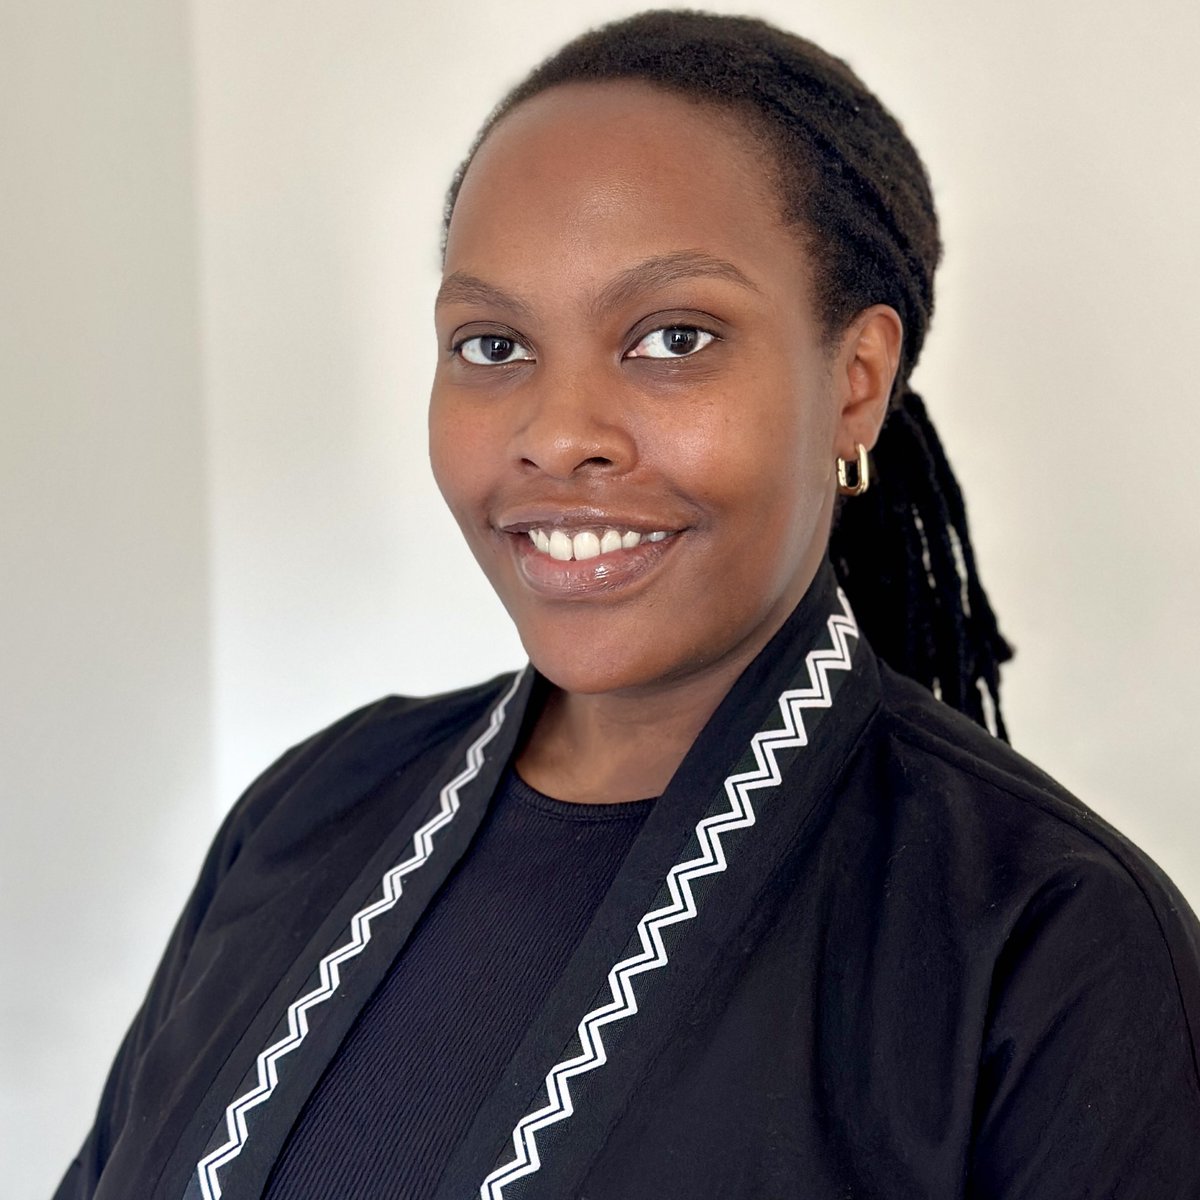 We're pleased to welcome Pauline Atete as a new PhD student! Pauline will work at Ghent University and University of Rwanda, exploring how trauma alters neuro-cognitive functions and impacts the post-genocide generation. Read more > moralsocialbrain.com/about/ @GhentCCN @ugent